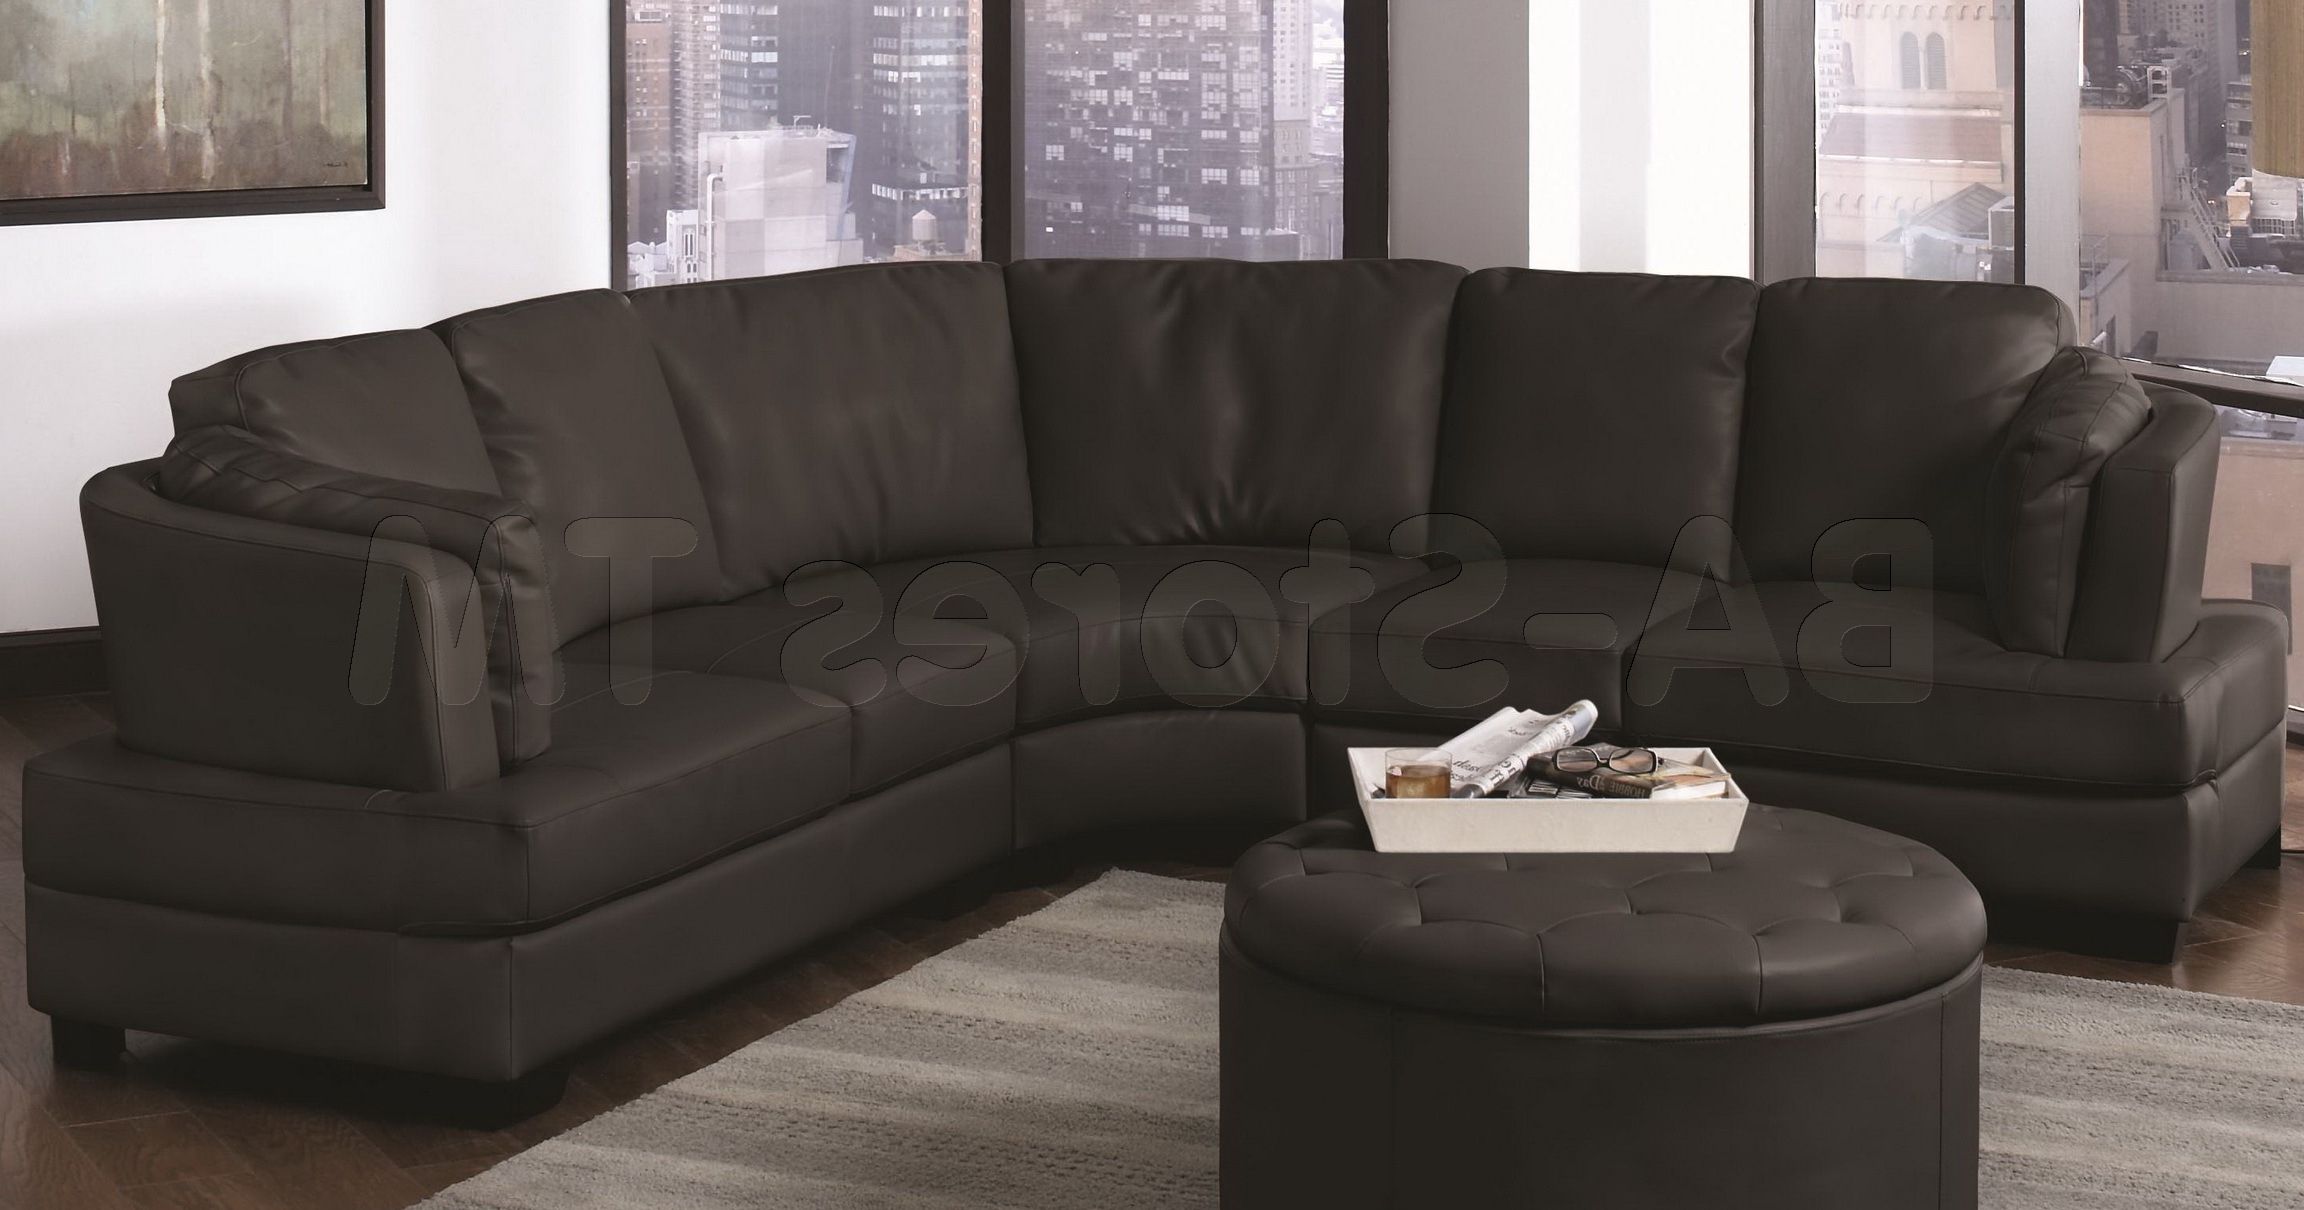 Rounded Corner Sofas Sectional Sofa Curved Corner Wedge In Bloutop Upholstered Sectional Sofas (View 12 of 15)